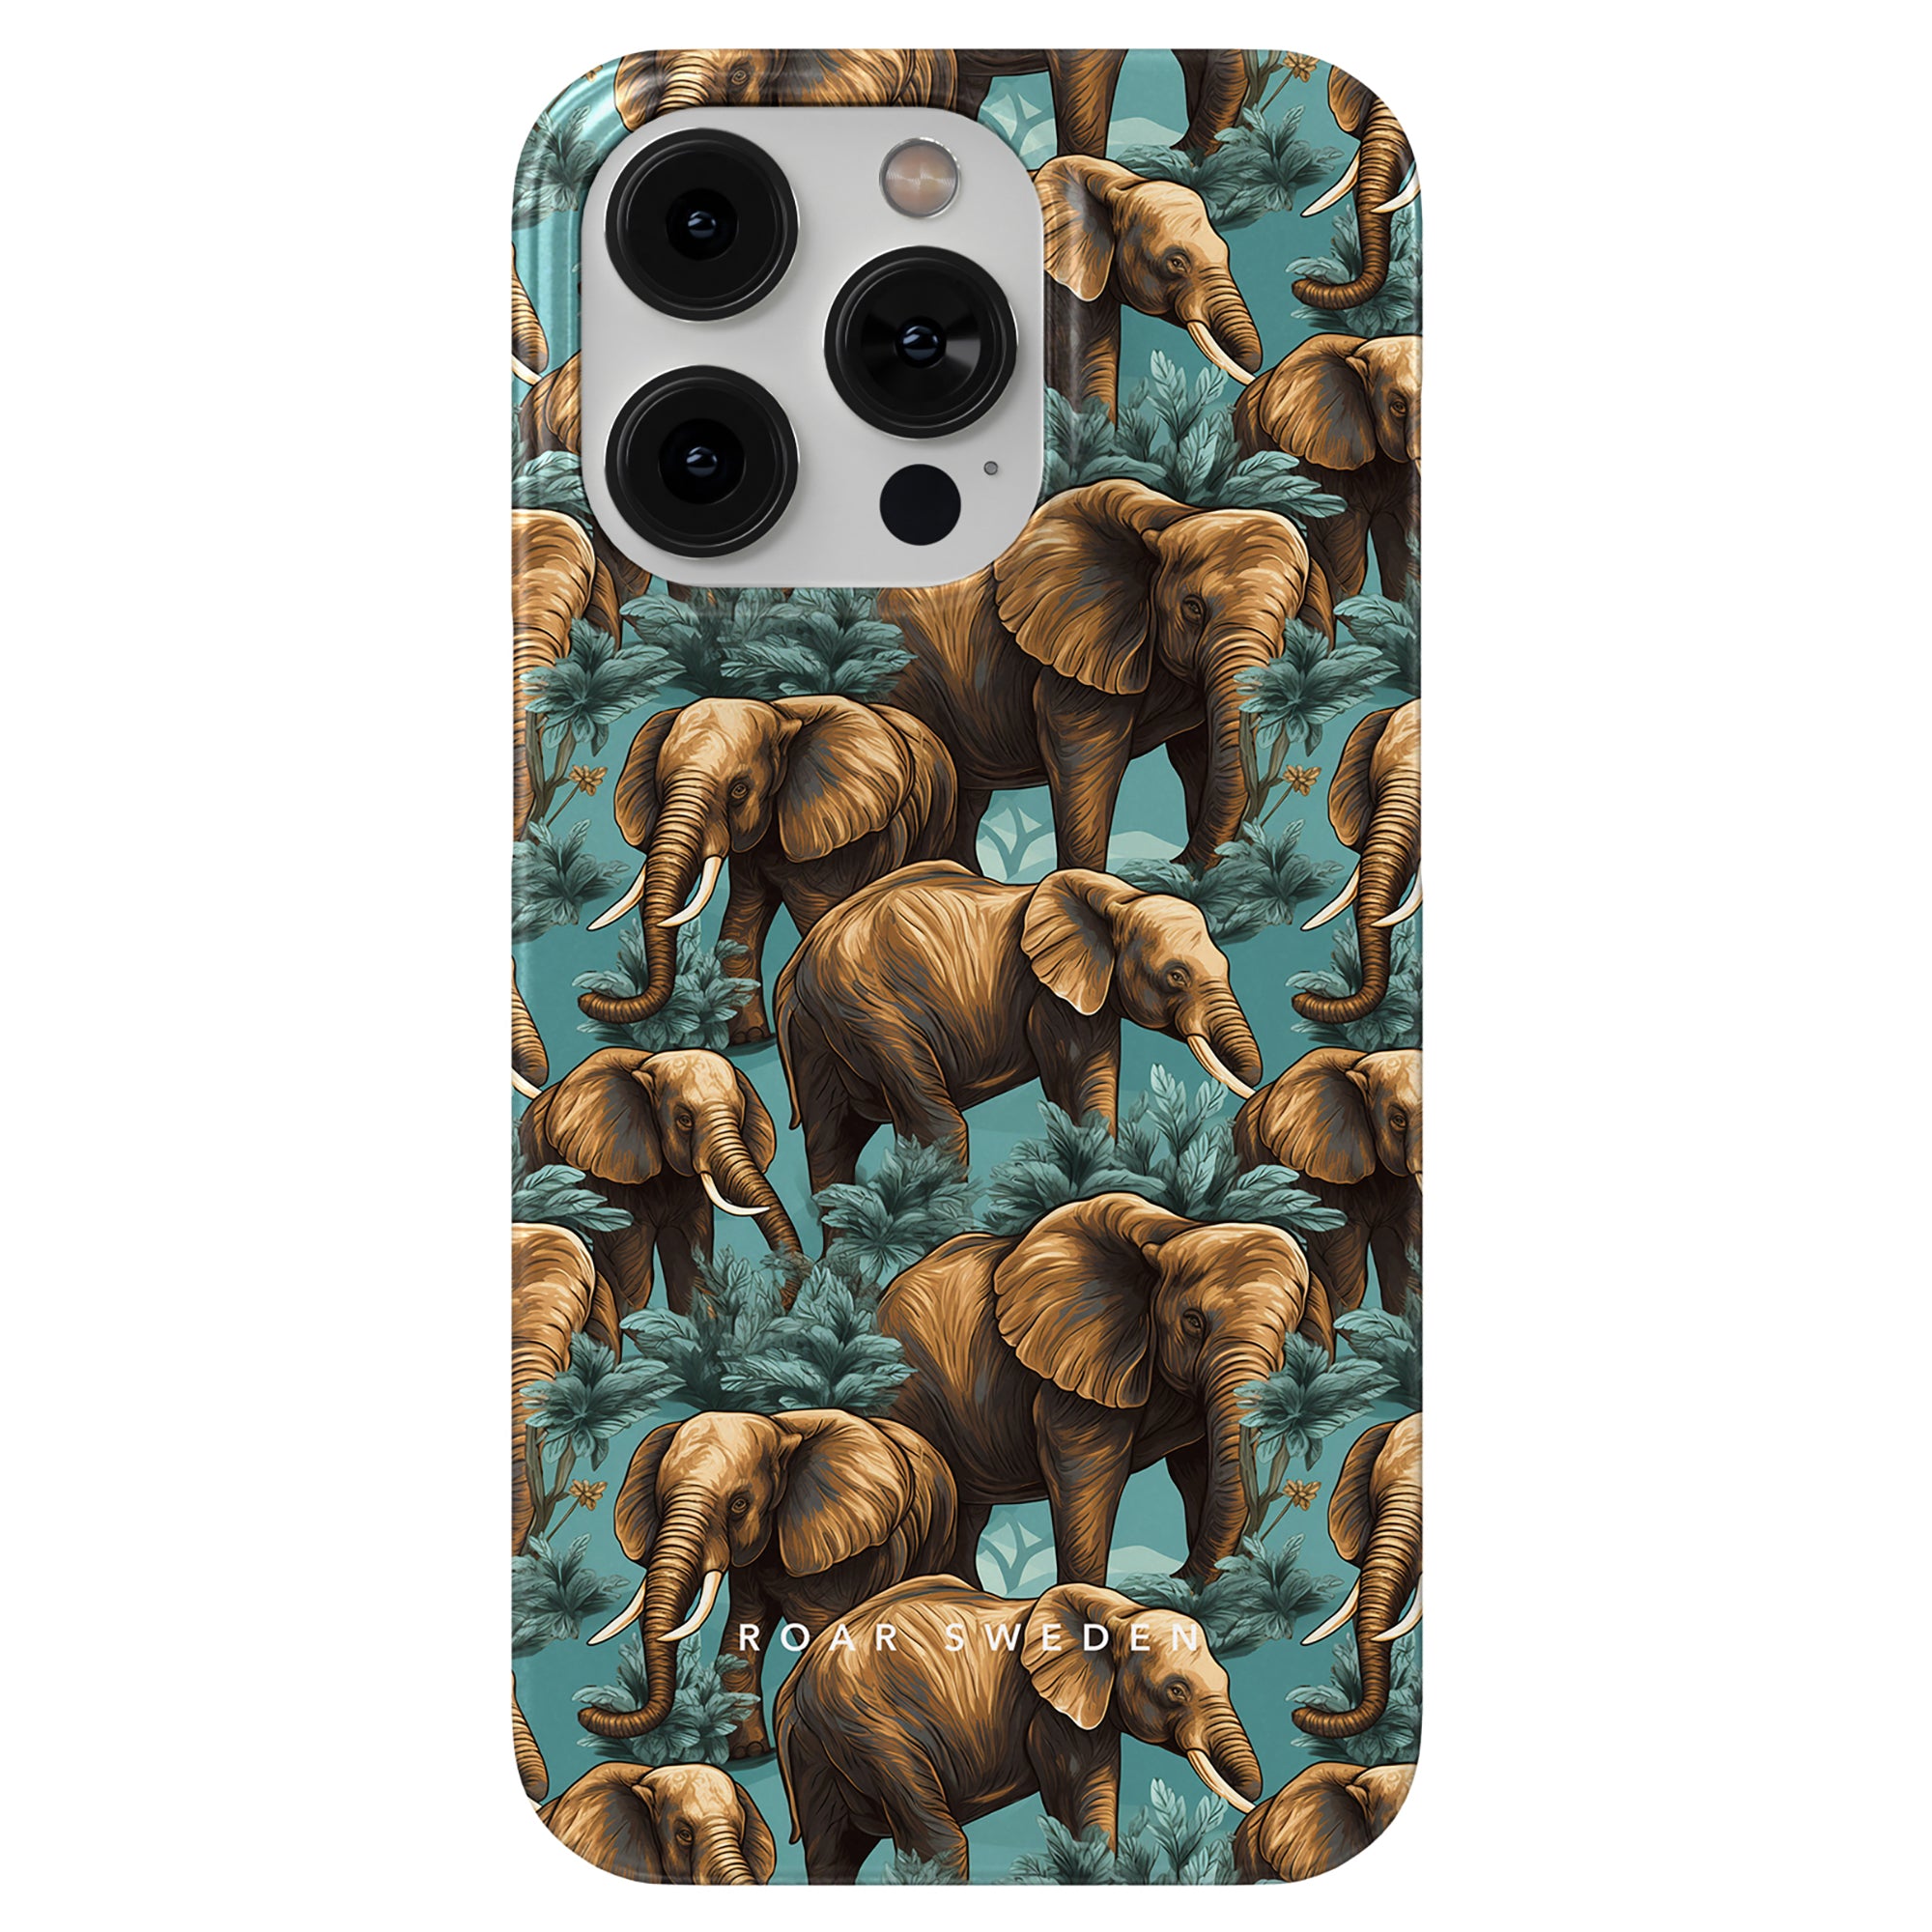 Hathi - Slim case decorated with a pattern of elephants amidst a tropical jungle background, part of the Safari Collection. The text "ROAR SWEDEN" is printed on the bottom.